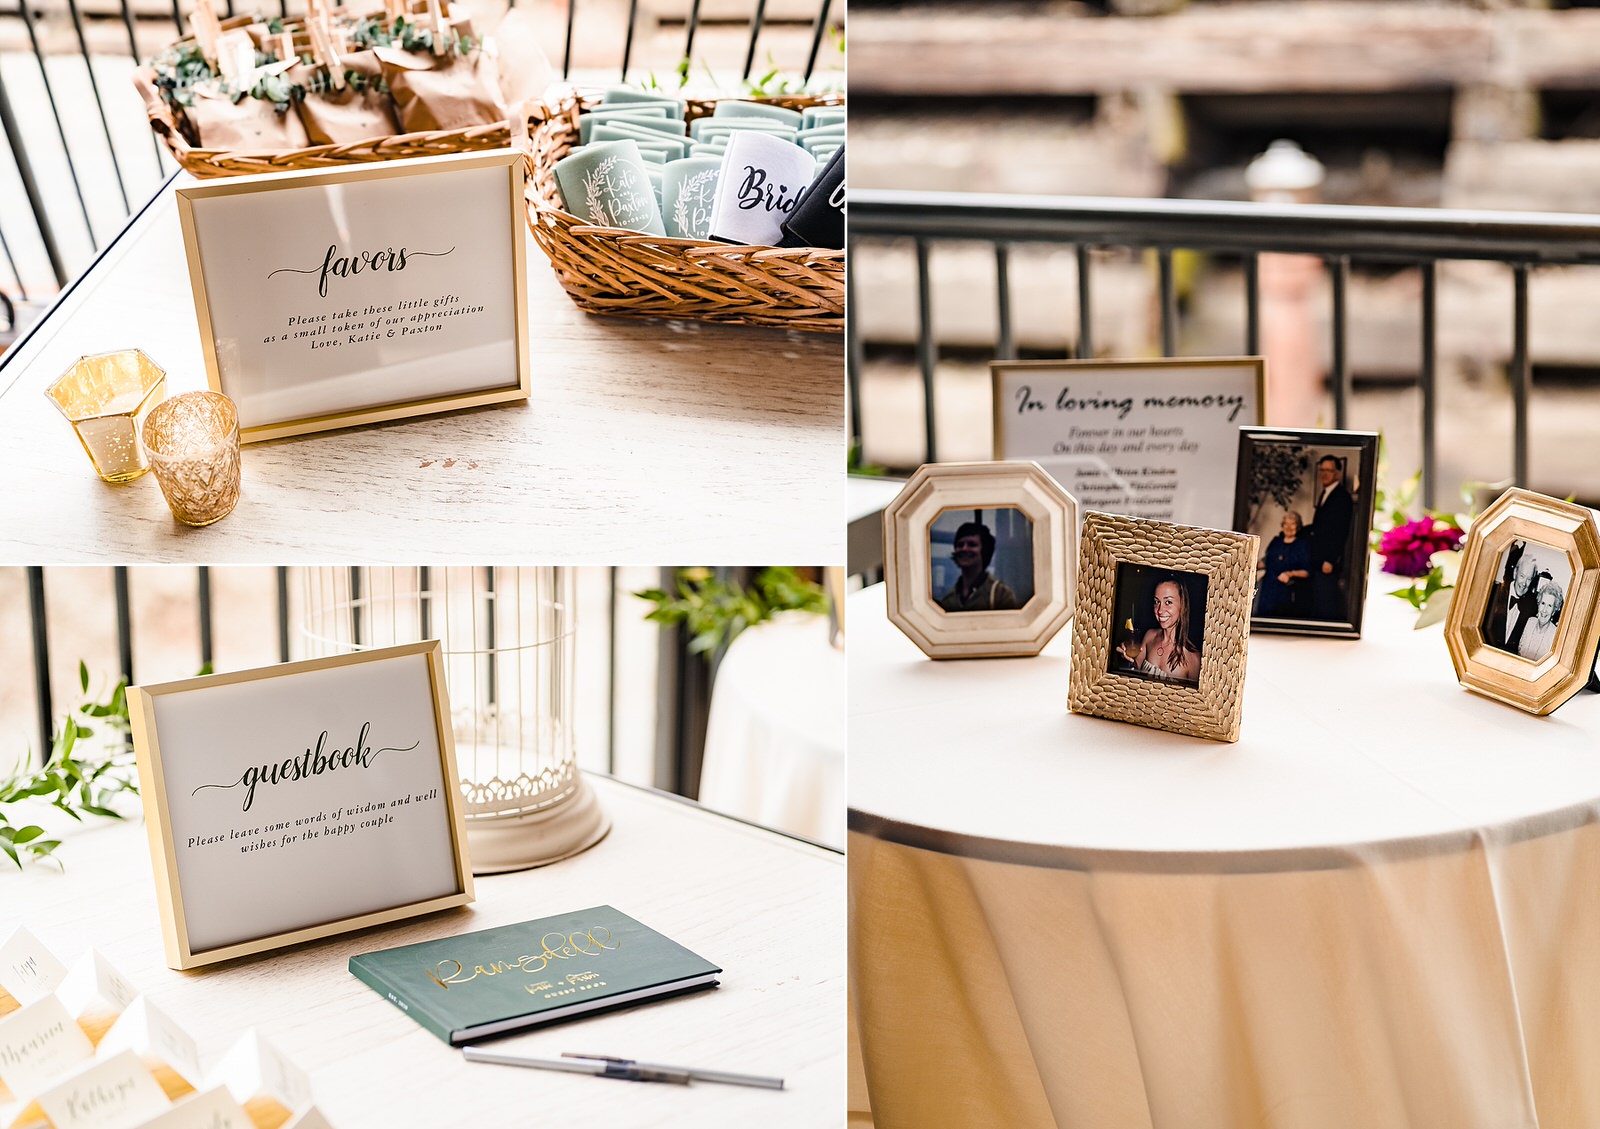 wedding ceremony details - memory table, guest book, and favors